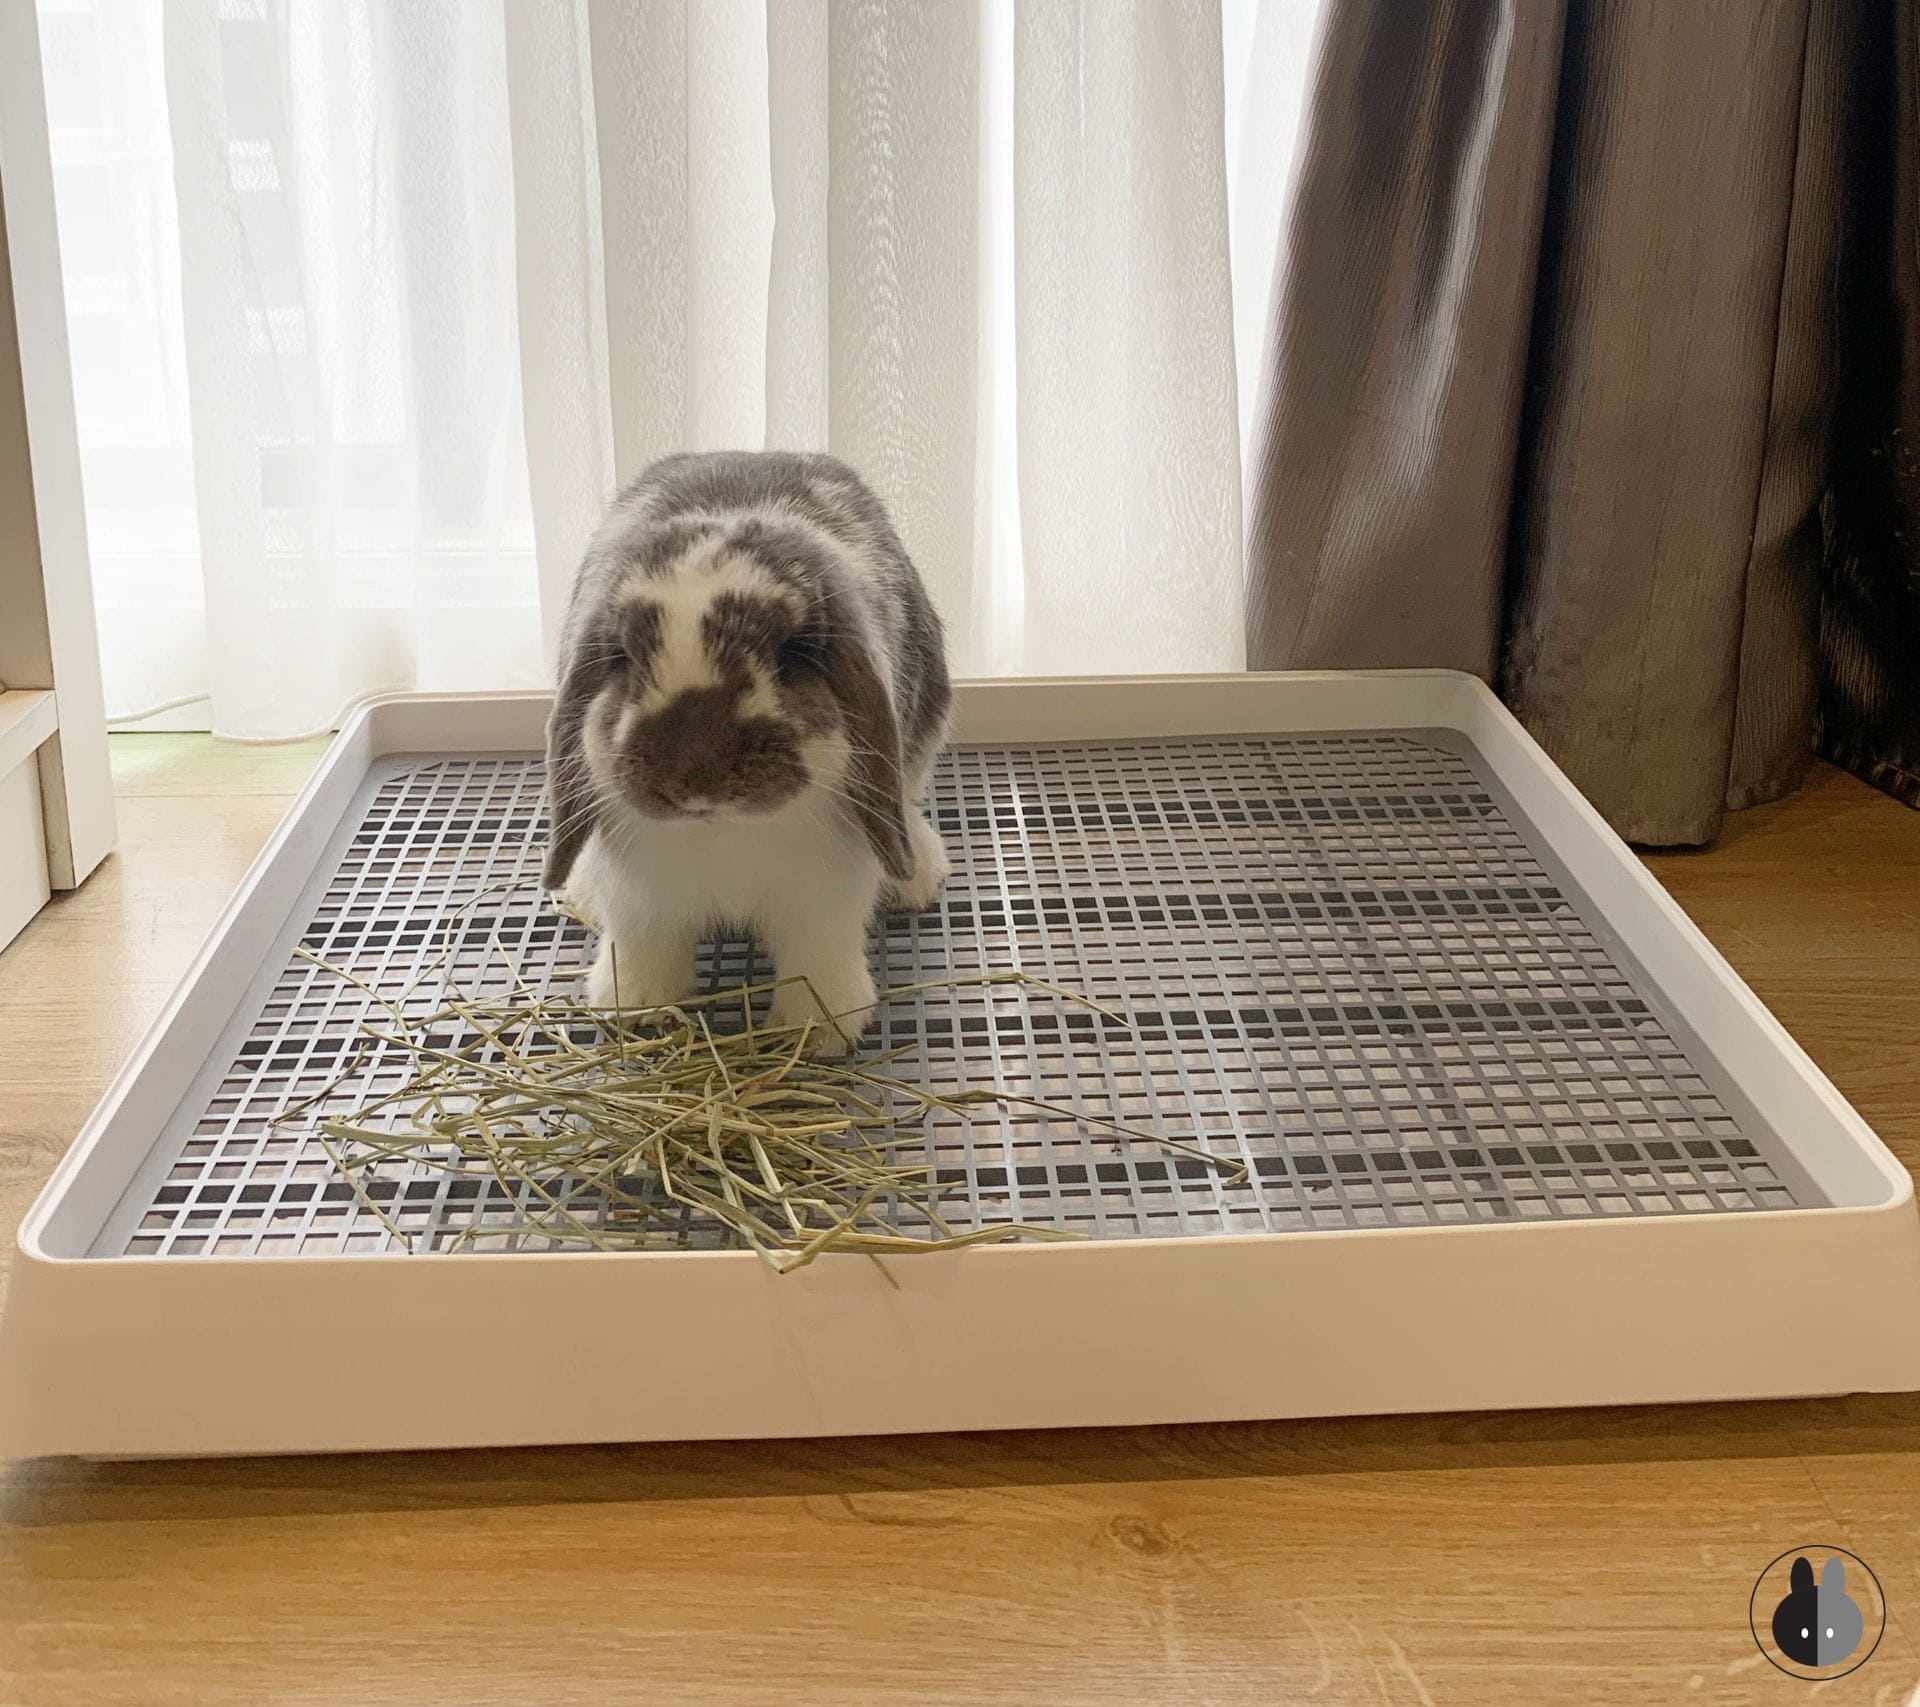 Our potty trained holland lop on a simple litter box